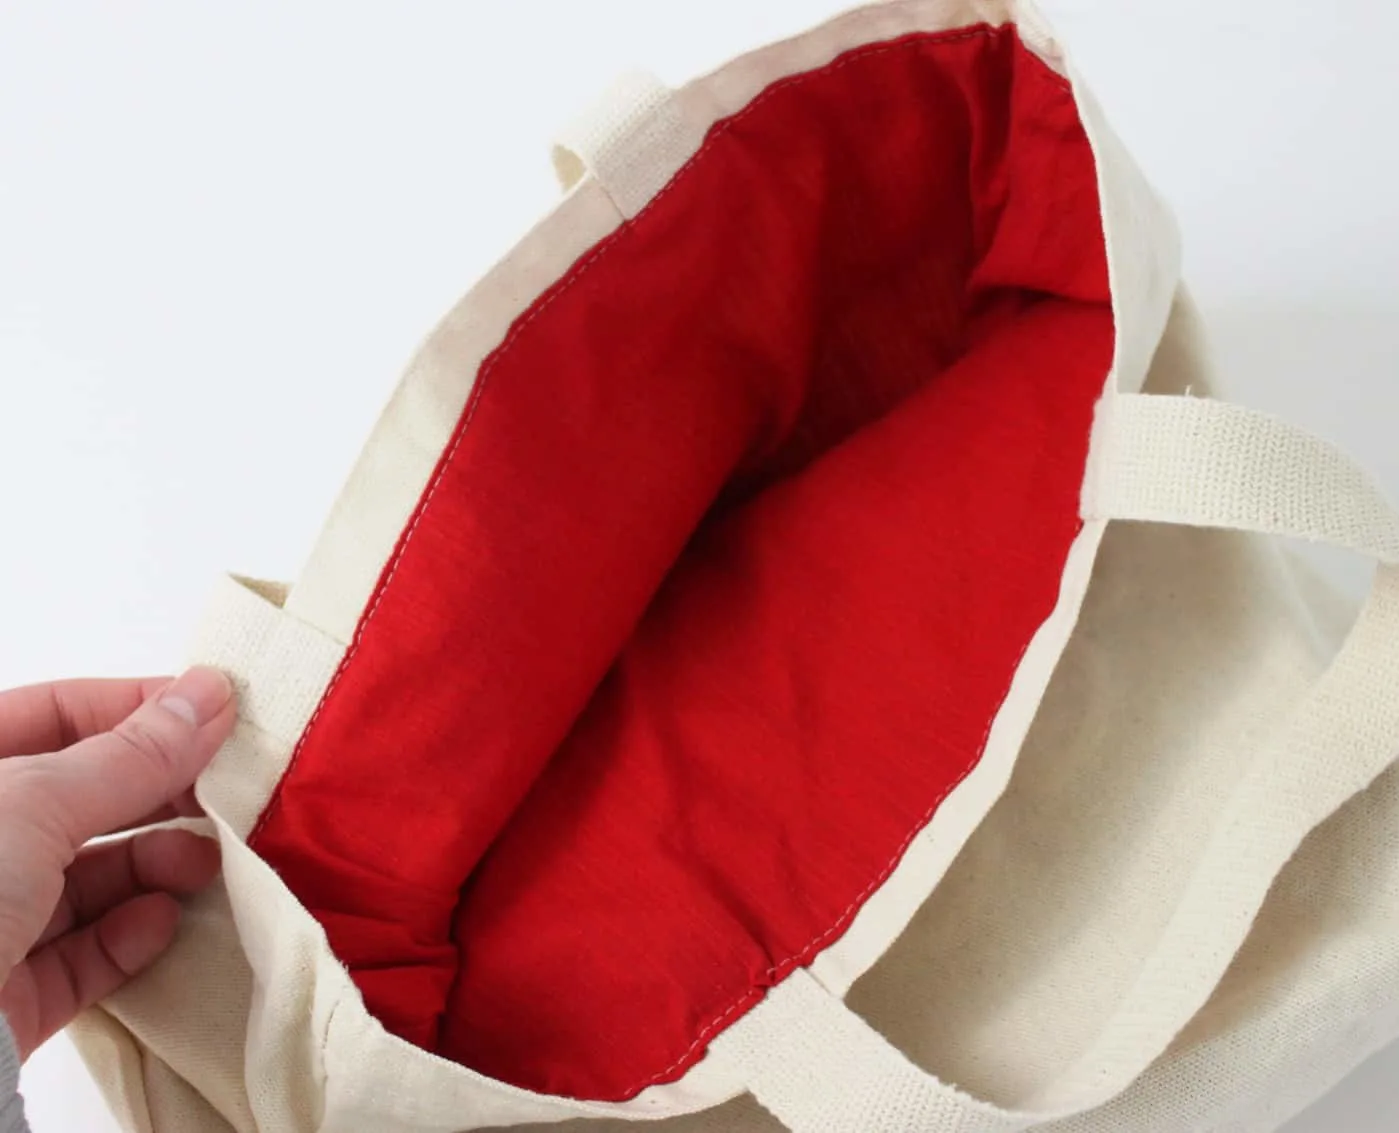 Hand showing the red lining on the inside of the canvas tote